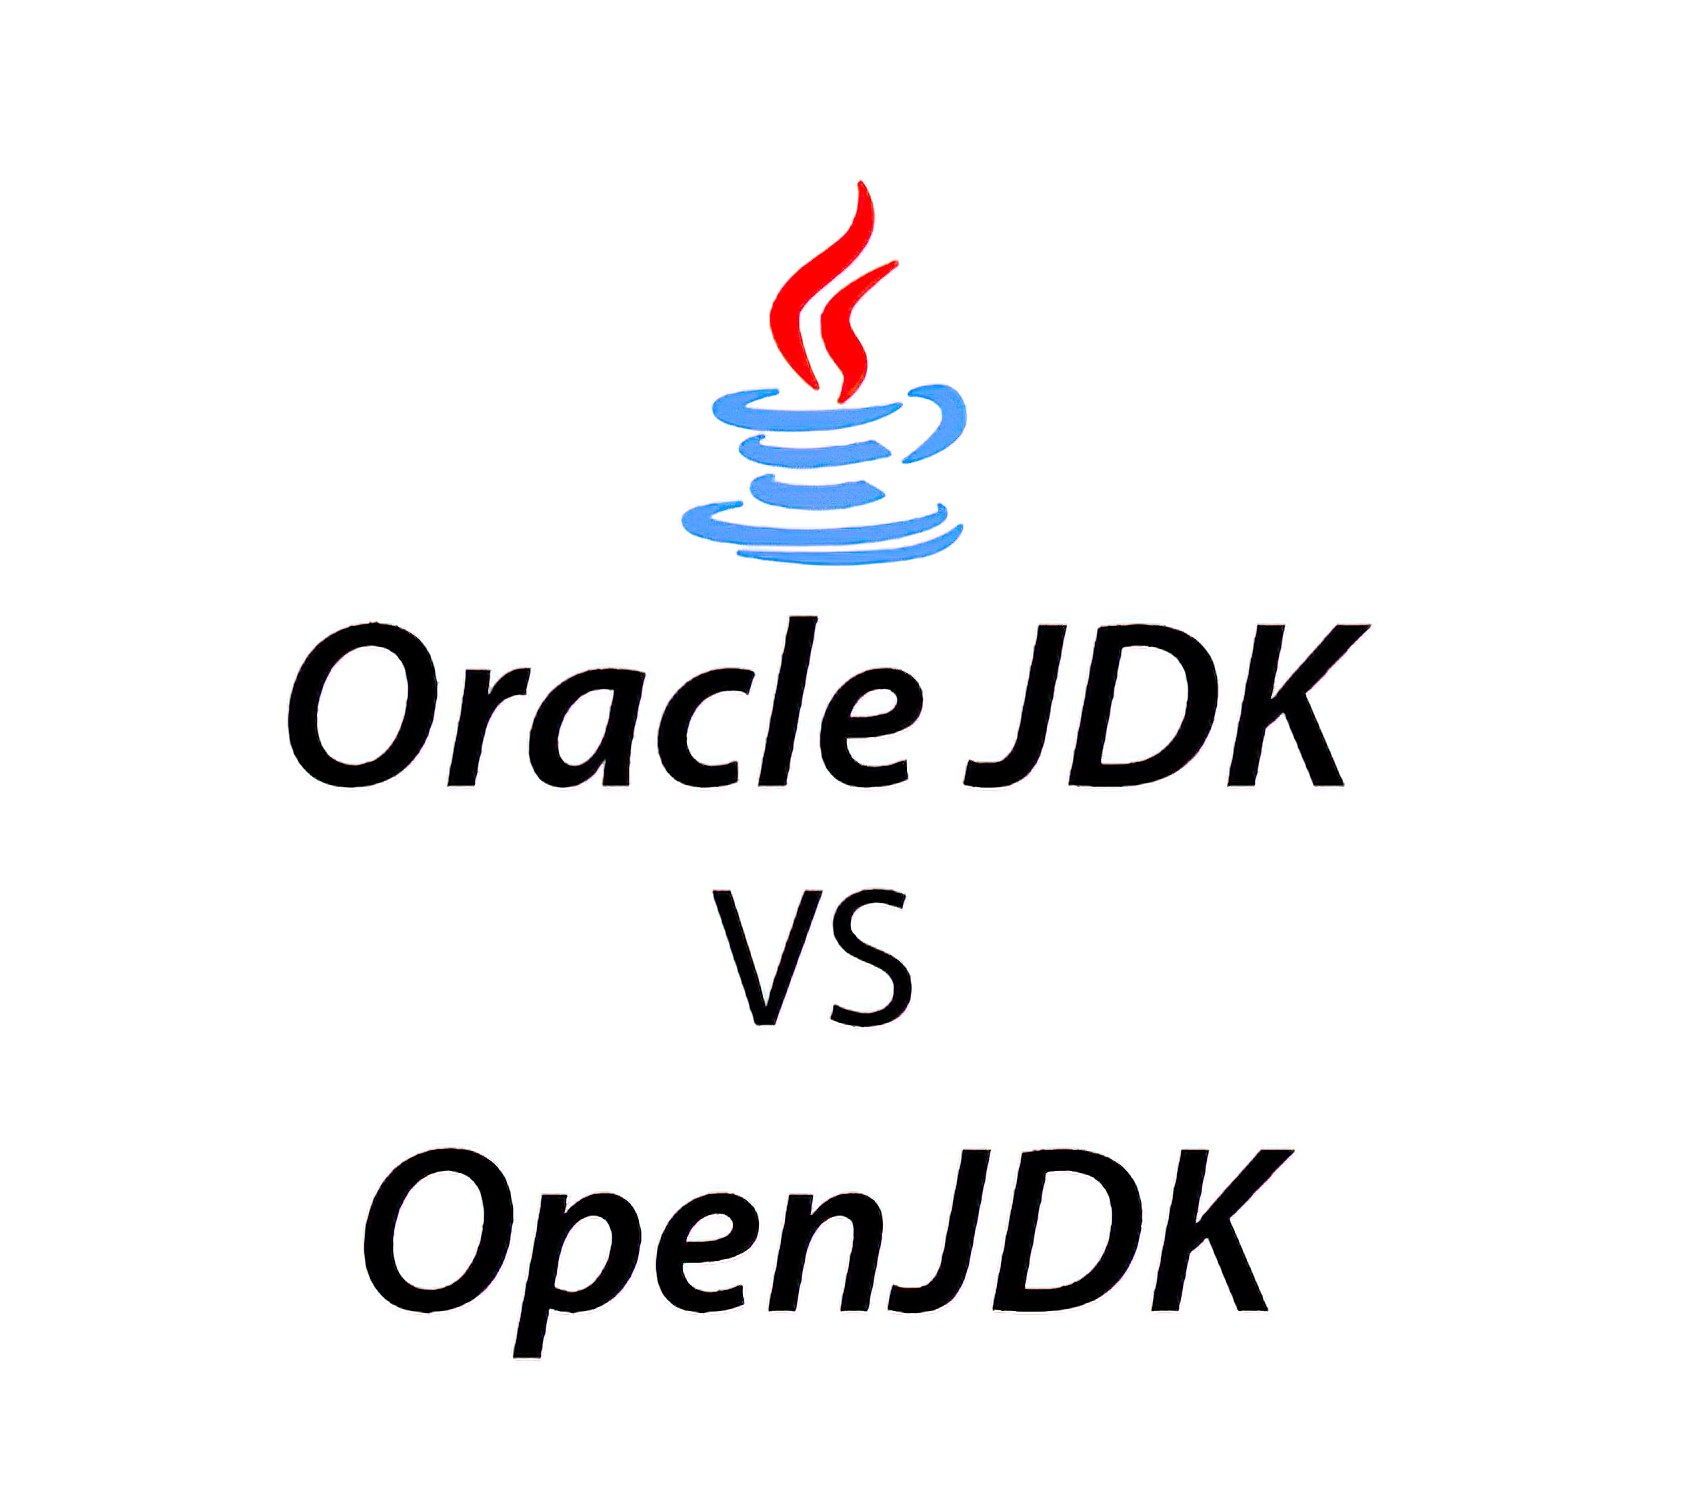 oracle jdk vs openjdk 8 for apacche spark